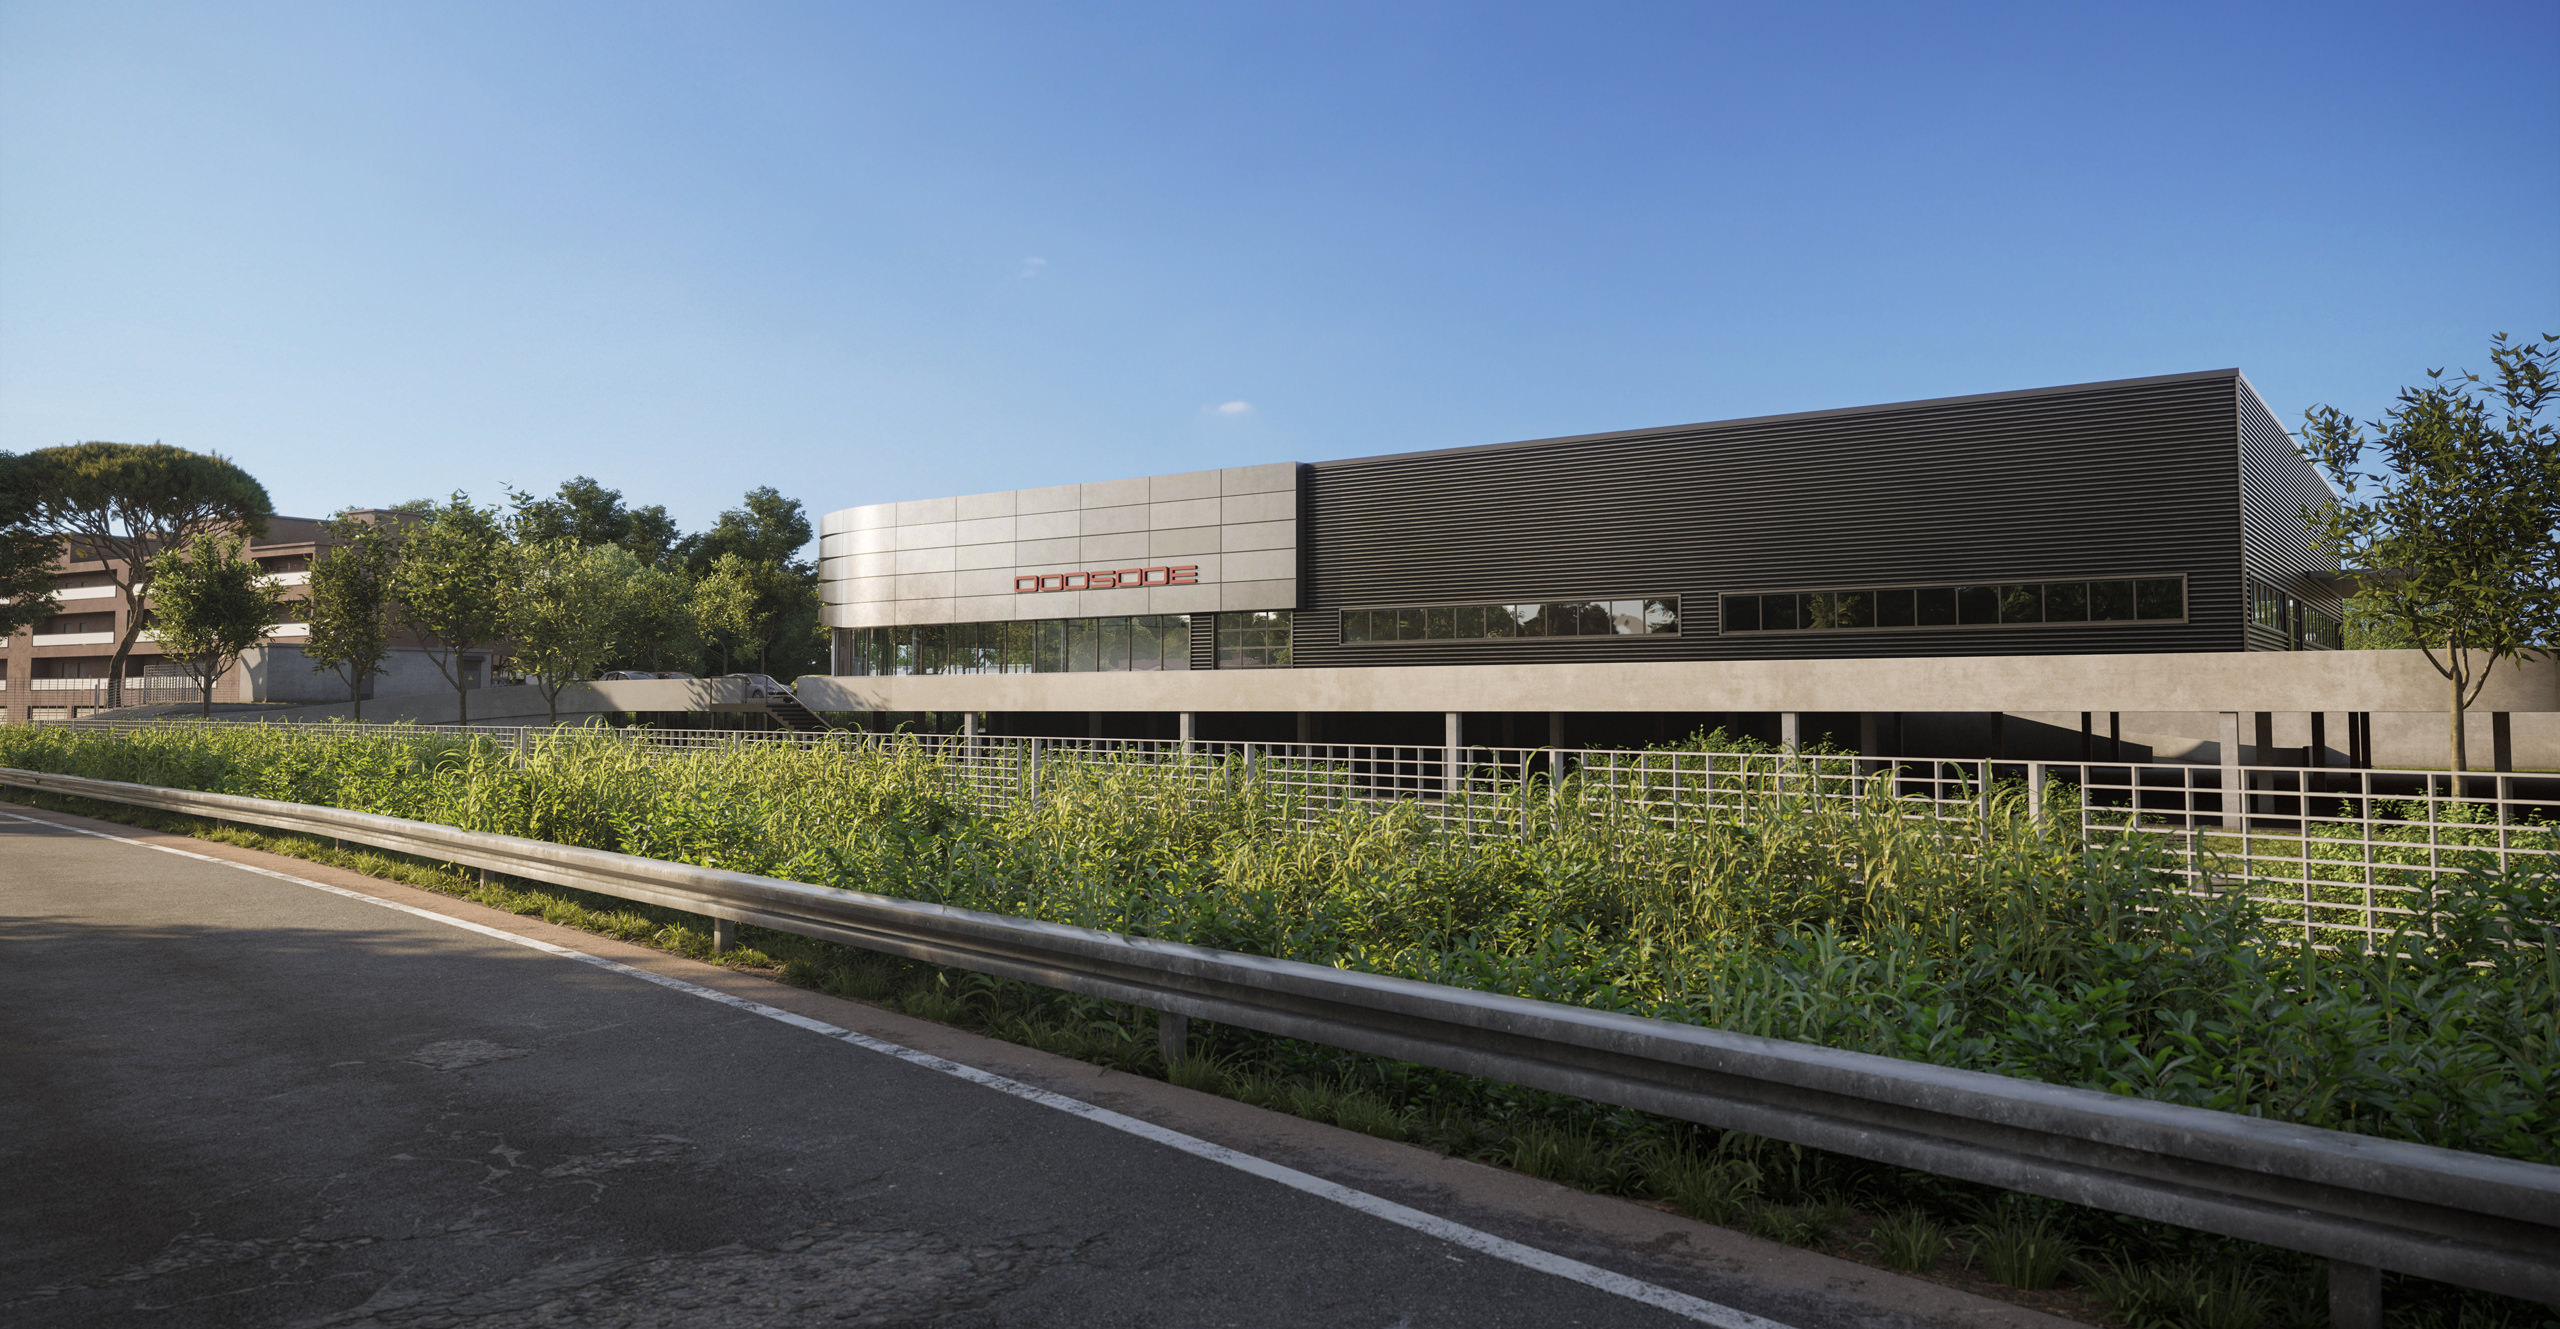 3D architectural visualization of Porsche car dealer center in Rome, Italy, street level view